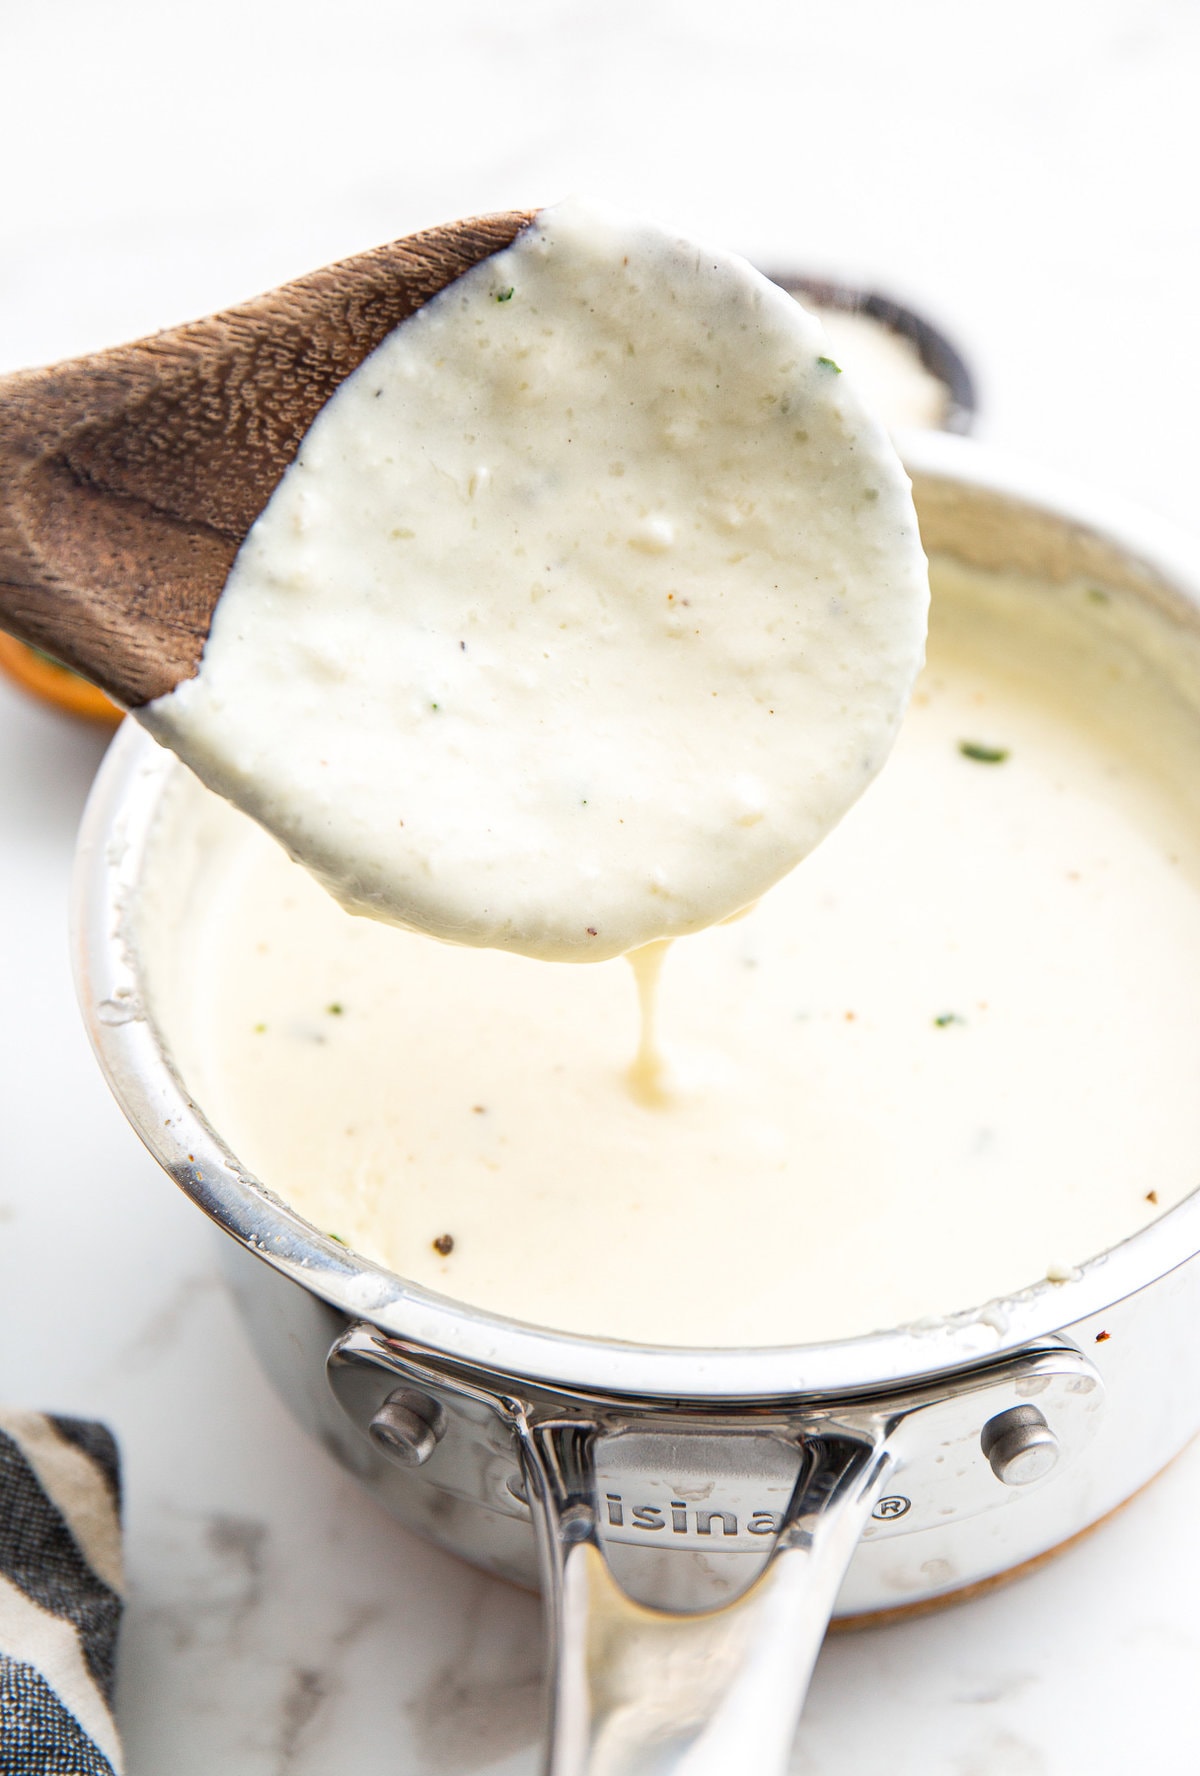 A portion of homemade Alfredo sauce on a wooden spoon.